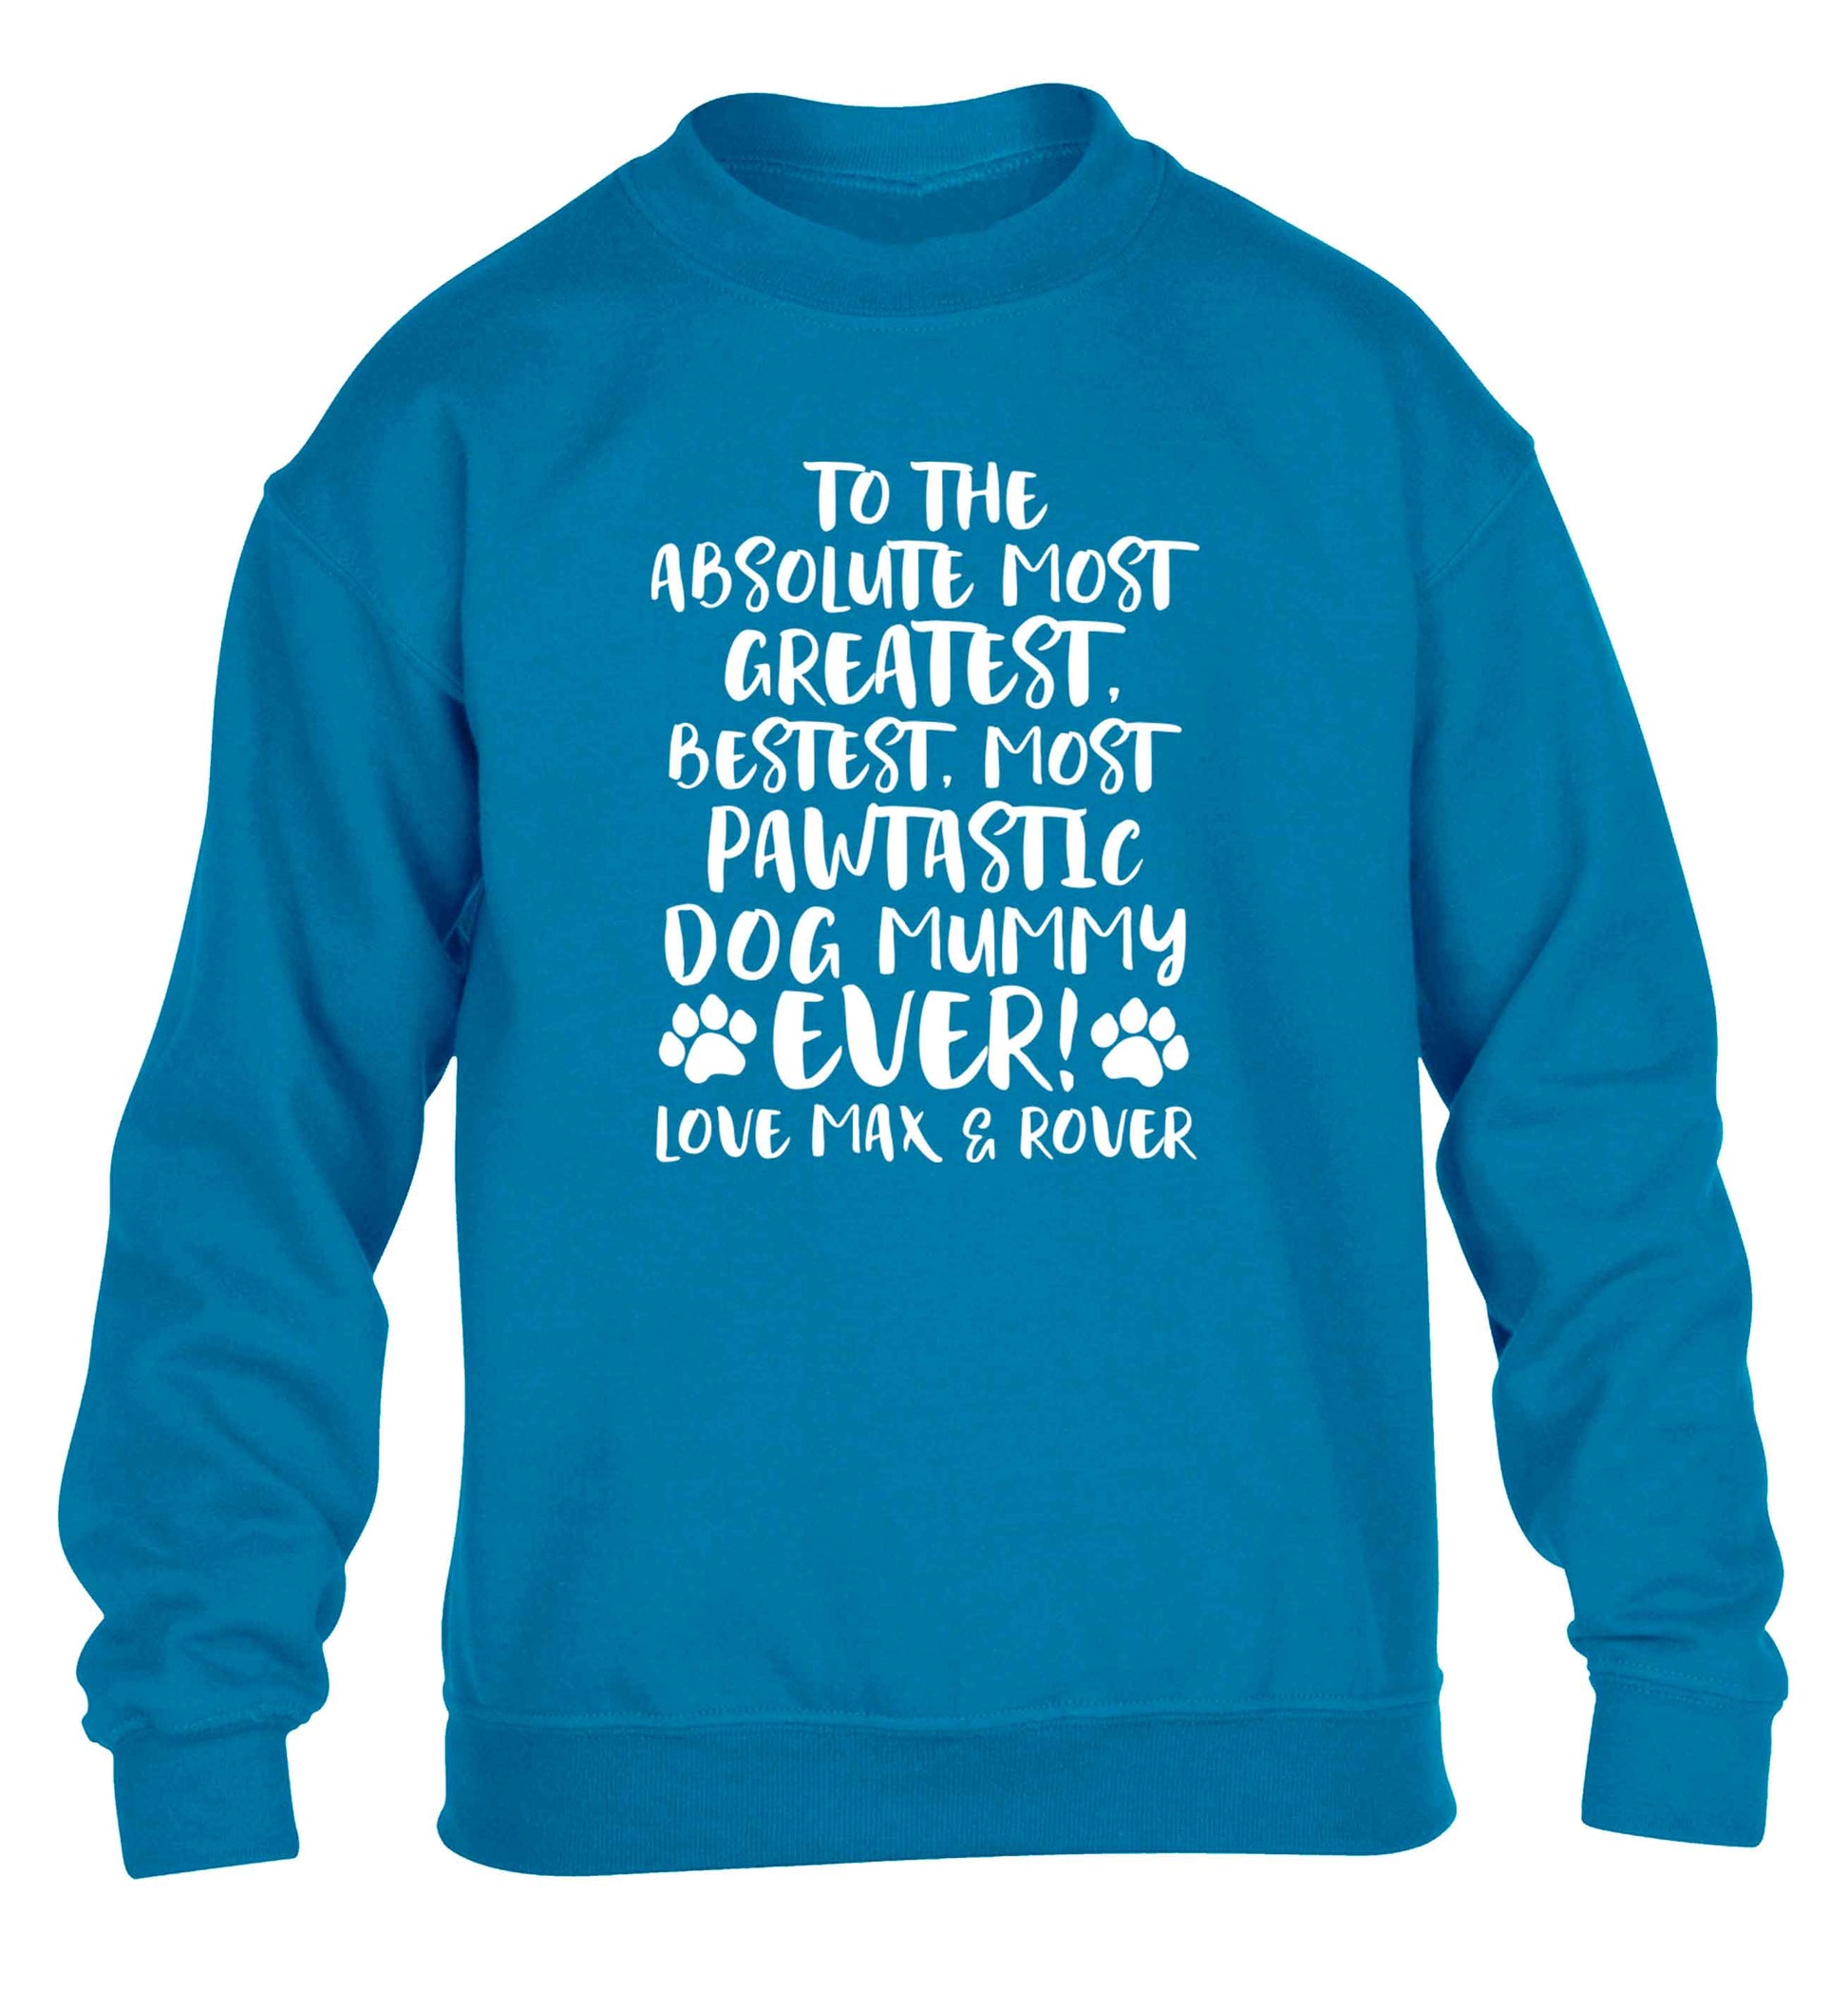 Personalsied to the most pawtastic dog mummy ever children's blue sweater 12-13 Years